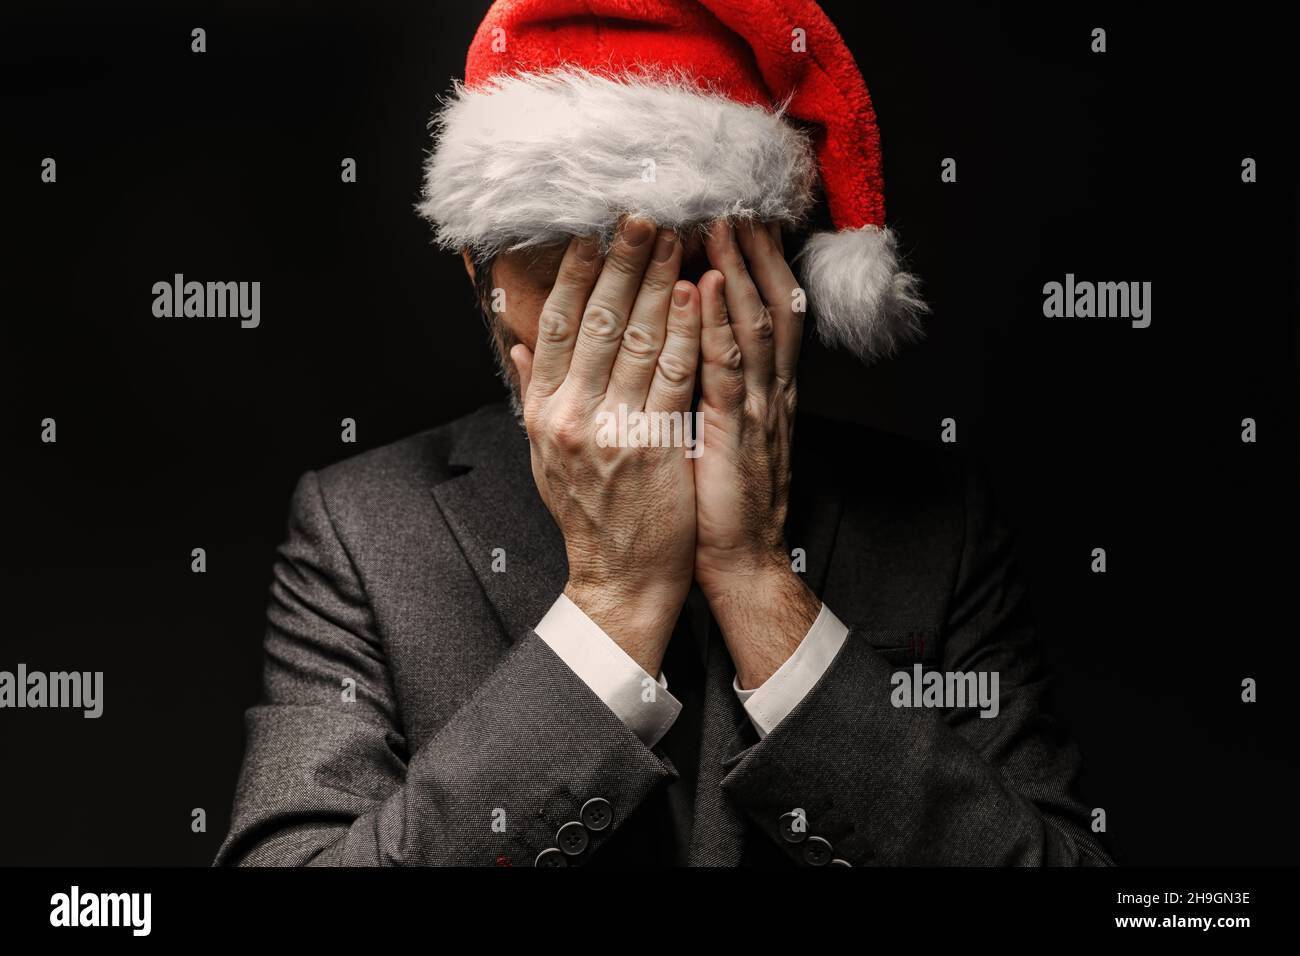 Very sad businessman with Santa Claus hat is crying with hands covering face, low key portrait with selective focus Stock Photo